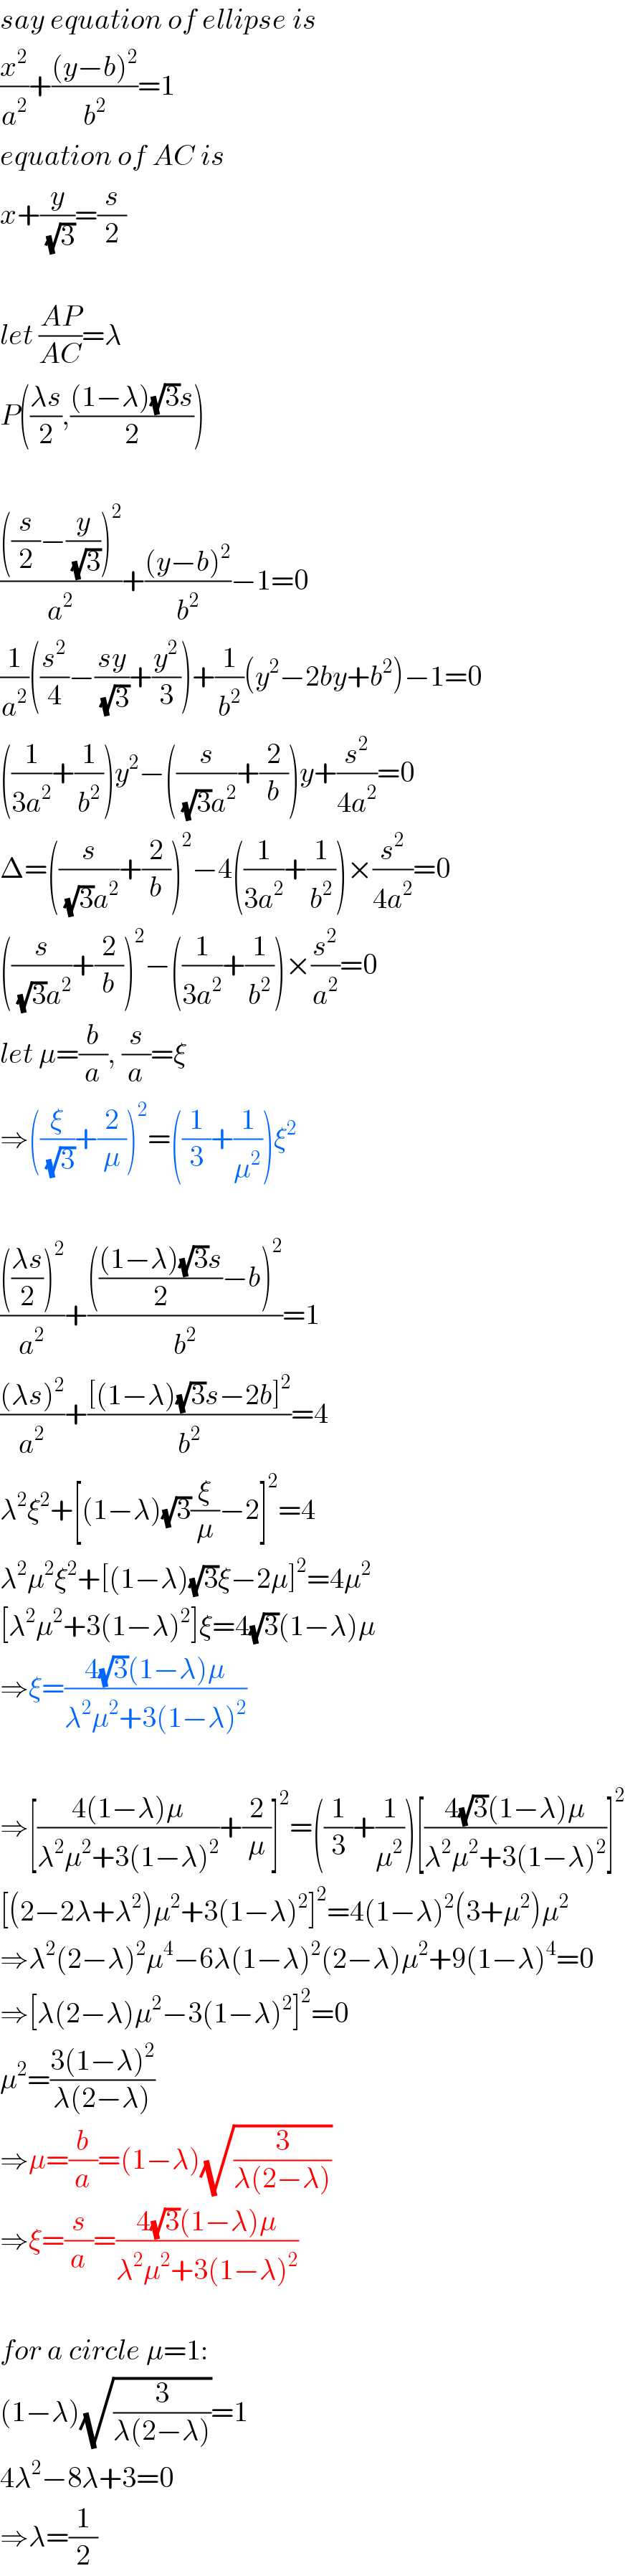 say equation of ellipse is  (x^2 /a^2 )+(((y−b)^2 )/b^2 )=1  equation of AC is  x+(y/(√3))=(s/2)    let ((AP)/(AC))=λ  P(((λs)/2),(((1−λ)(√3)s)/2))    ((((s/2)−(y/(√3)))^2 )/a^2 )+(((y−b)^2 )/b^2 )−1=0  (1/a^2 )((s^2 /4)−((sy)/(√3))+(y^2 /3))+(1/b^2 )(y^2 −2by+b^2 )−1=0  ((1/(3a^2 ))+(1/b^2 ))y^2 −((s/((√3)a^2 ))+(2/b))y+(s^2 /(4a^2 ))=0  Δ=((s/((√3)a^2 ))+(2/b))^2 −4((1/(3a^2 ))+(1/b^2 ))×(s^2 /(4a^2 ))=0  ((s/((√3)a^2 ))+(2/b))^2 −((1/(3a^2 ))+(1/b^2 ))×(s^2 /a^2 )=0  let μ=(b/a), (s/a)=ξ  ⇒((ξ/(√3))+(2/μ))^2 =((1/3)+(1/μ^2 ))ξ^2     (((((λs)/2))^2 )/a^2 )+((((((1−λ)(√3)s)/2)−b)^2 )/b^2 )=1  (((λs)^2 )/a^2 )+(([(1−λ)(√3)s−2b]^2 )/b^2 )=4  λ^2 ξ^2 +[(1−λ)(√3)(ξ/μ)−2]^2 =4  λ^2 μ^2 ξ^2 +[(1−λ)(√3)ξ−2μ]^2 =4μ^2   [λ^2 μ^2 +3(1−λ)^2 ]ξ=4(√3)(1−λ)μ  ⇒ξ=((4(√3)(1−λ)μ)/(λ^2 μ^2 +3(1−λ)^2 ))    ⇒[((4(1−λ)μ)/(λ^2 μ^2 +3(1−λ)^2 ))+(2/μ)]^2 =((1/3)+(1/μ^2 ))[((4(√3)(1−λ)μ)/(λ^2 μ^2 +3(1−λ)^2 ))]^2   [(2−2λ+λ^2 )μ^2 +3(1−λ)^2 ]^2 =4(1−λ)^2 (3+μ^2 )μ^2   ⇒λ^2 (2−λ)^2 μ^4 −6λ(1−λ)^2 (2−λ)μ^2 +9(1−λ)^4 =0  ⇒[λ(2−λ)μ^2 −3(1−λ)^2 ]^2 =0  μ^2 =((3(1−λ)^2 )/(λ(2−λ)))  ⇒μ=(b/a)=(1−λ)(√(3/(λ(2−λ))))  ⇒ξ=(s/a)=((4(√3)(1−λ)μ)/(λ^2 μ^2 +3(1−λ)^2 ))    for a circle μ=1:  (1−λ)(√(3/(λ(2−λ))))=1  4λ^2 −8λ+3=0  ⇒λ=(1/2)  